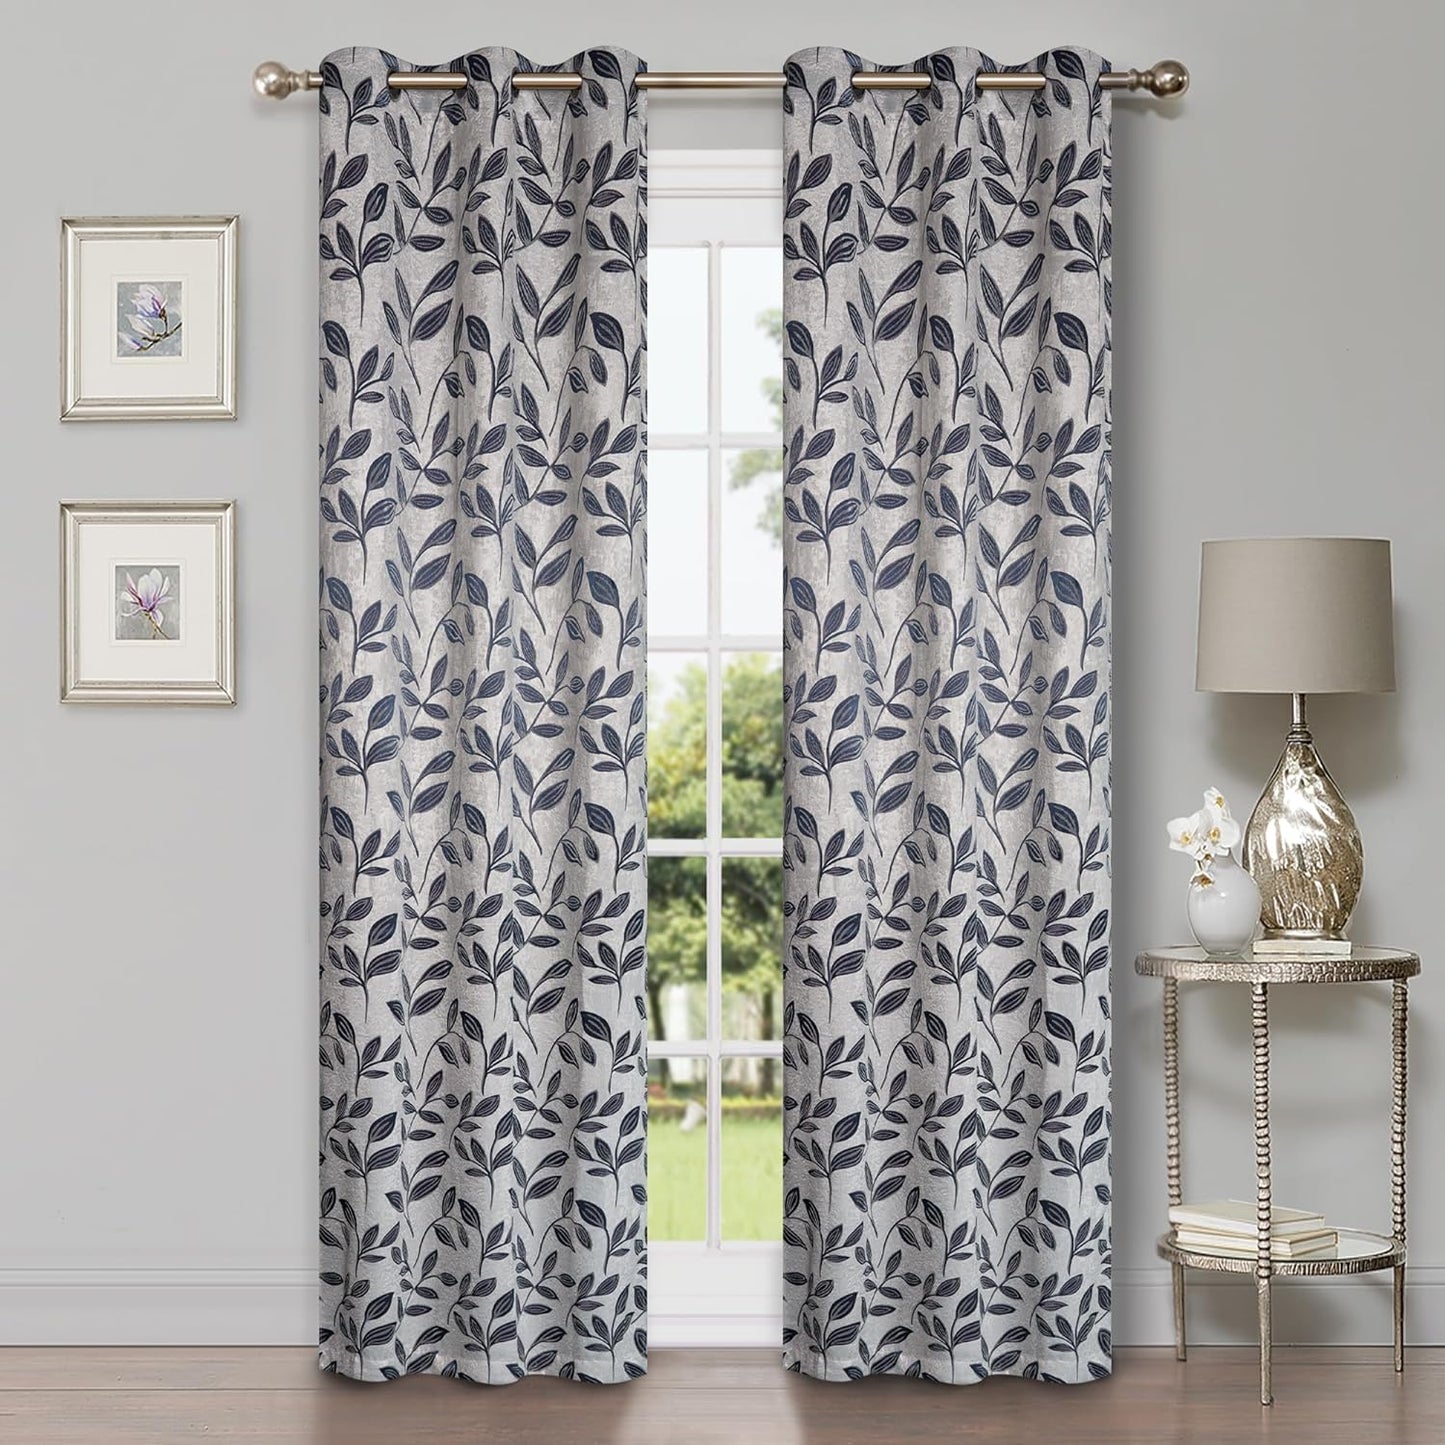 Superior Blackout Curtains, Room Darkening Window Accent for Bedroom, Sun Blocking, Thermal, Modern Bohemian Curtains, Leaves Collection, Set of 2 Panels, Rod Pocket - 52 in X 63 In, Nickel Black  Home City Inc. White-Navy Blue 42 In X 84 In (W X L) 